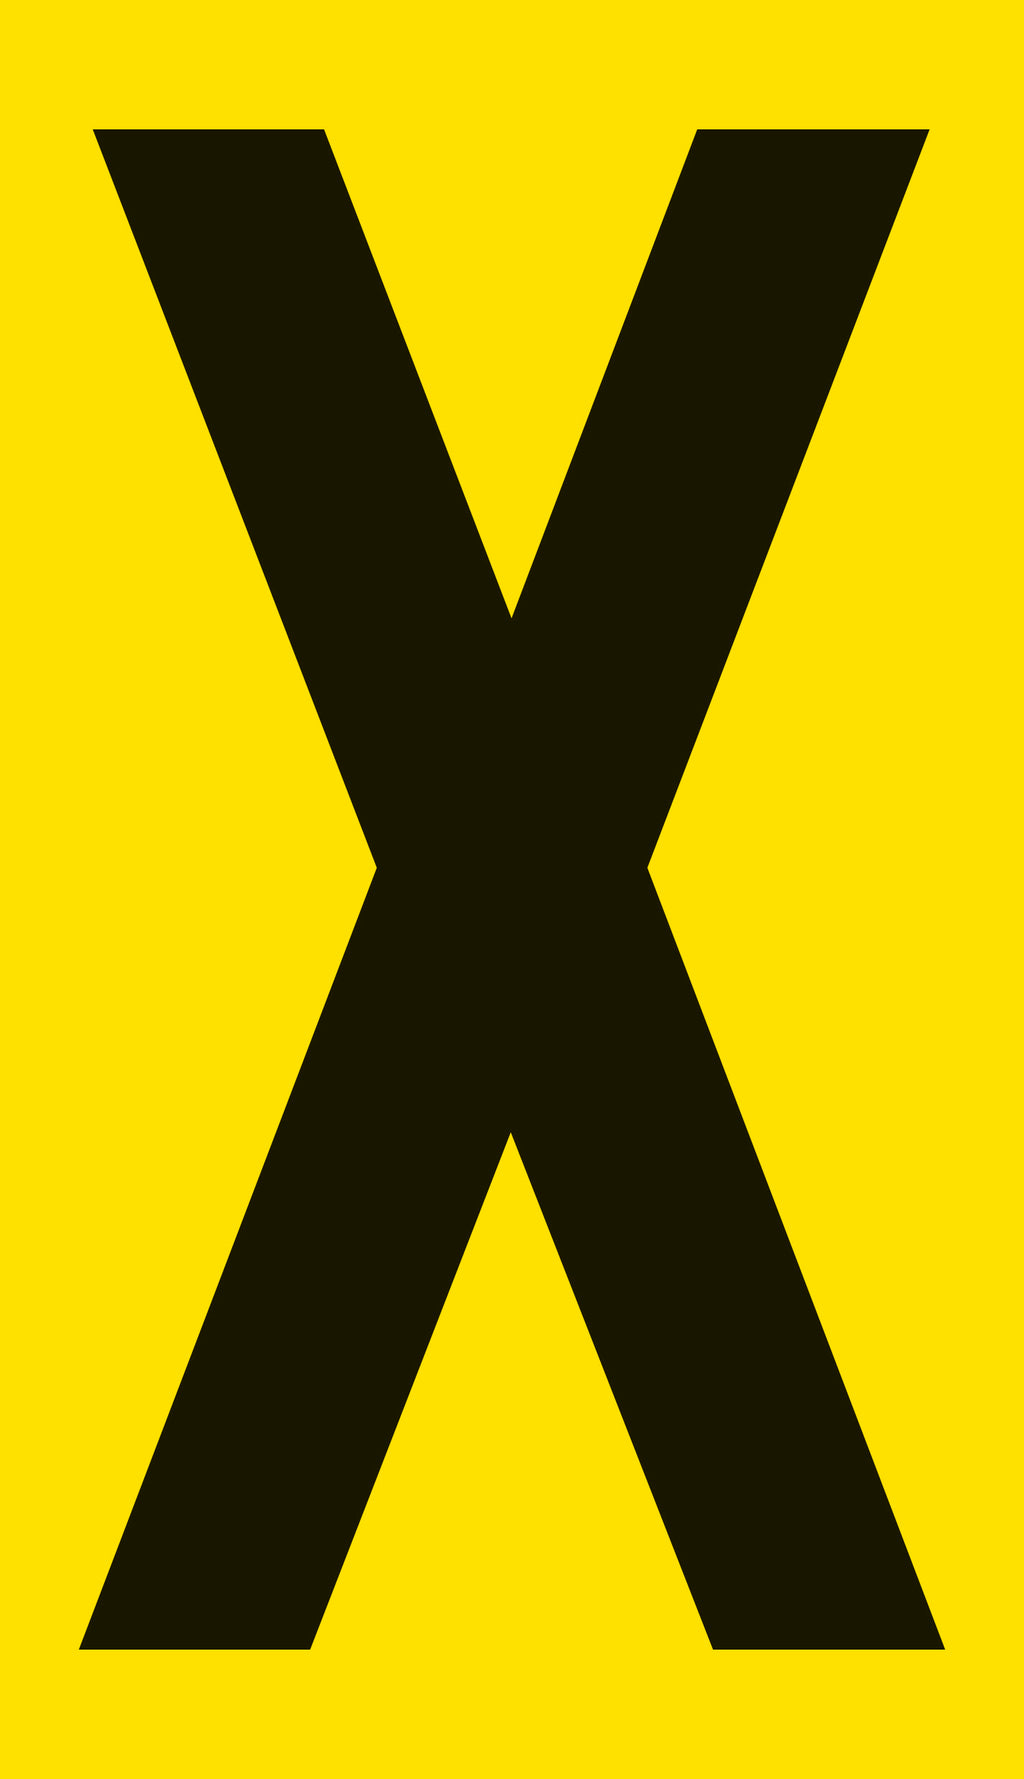 Mighty Line YELLOW Die Cut Location Markers - Letter X - Pack of 10